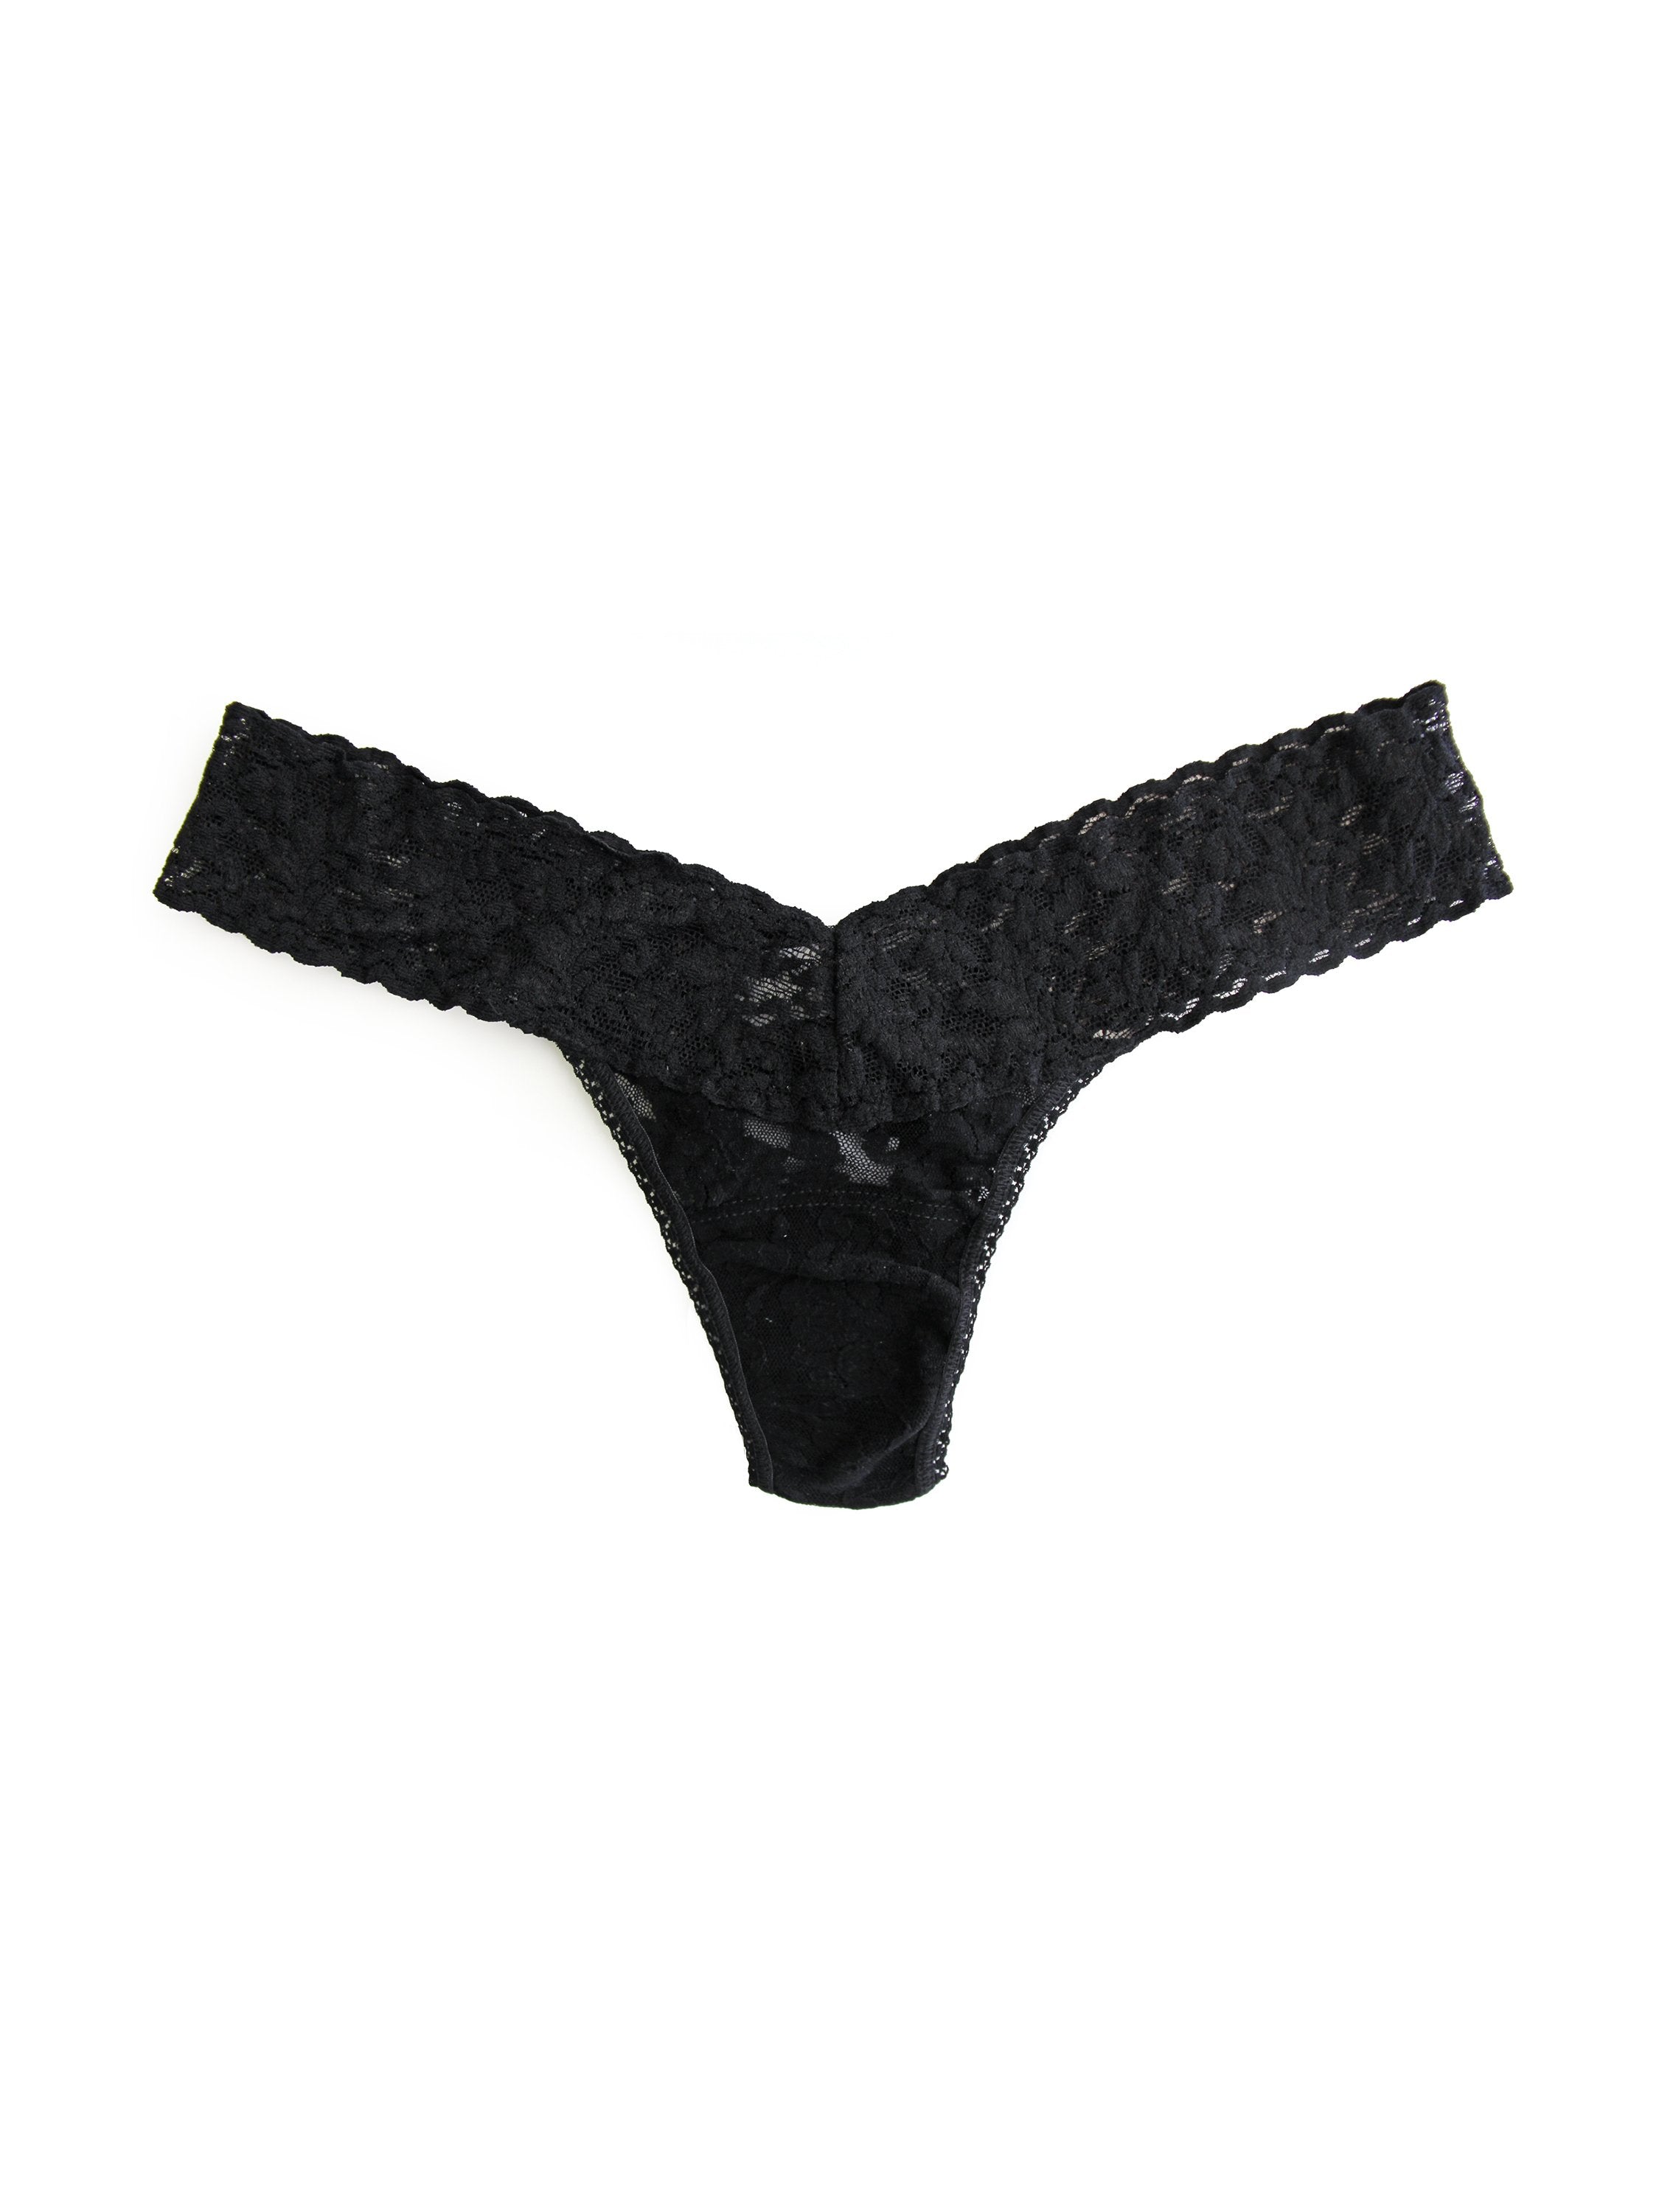 Hanky Panky Signature Lace Low Rise Thong - O/S